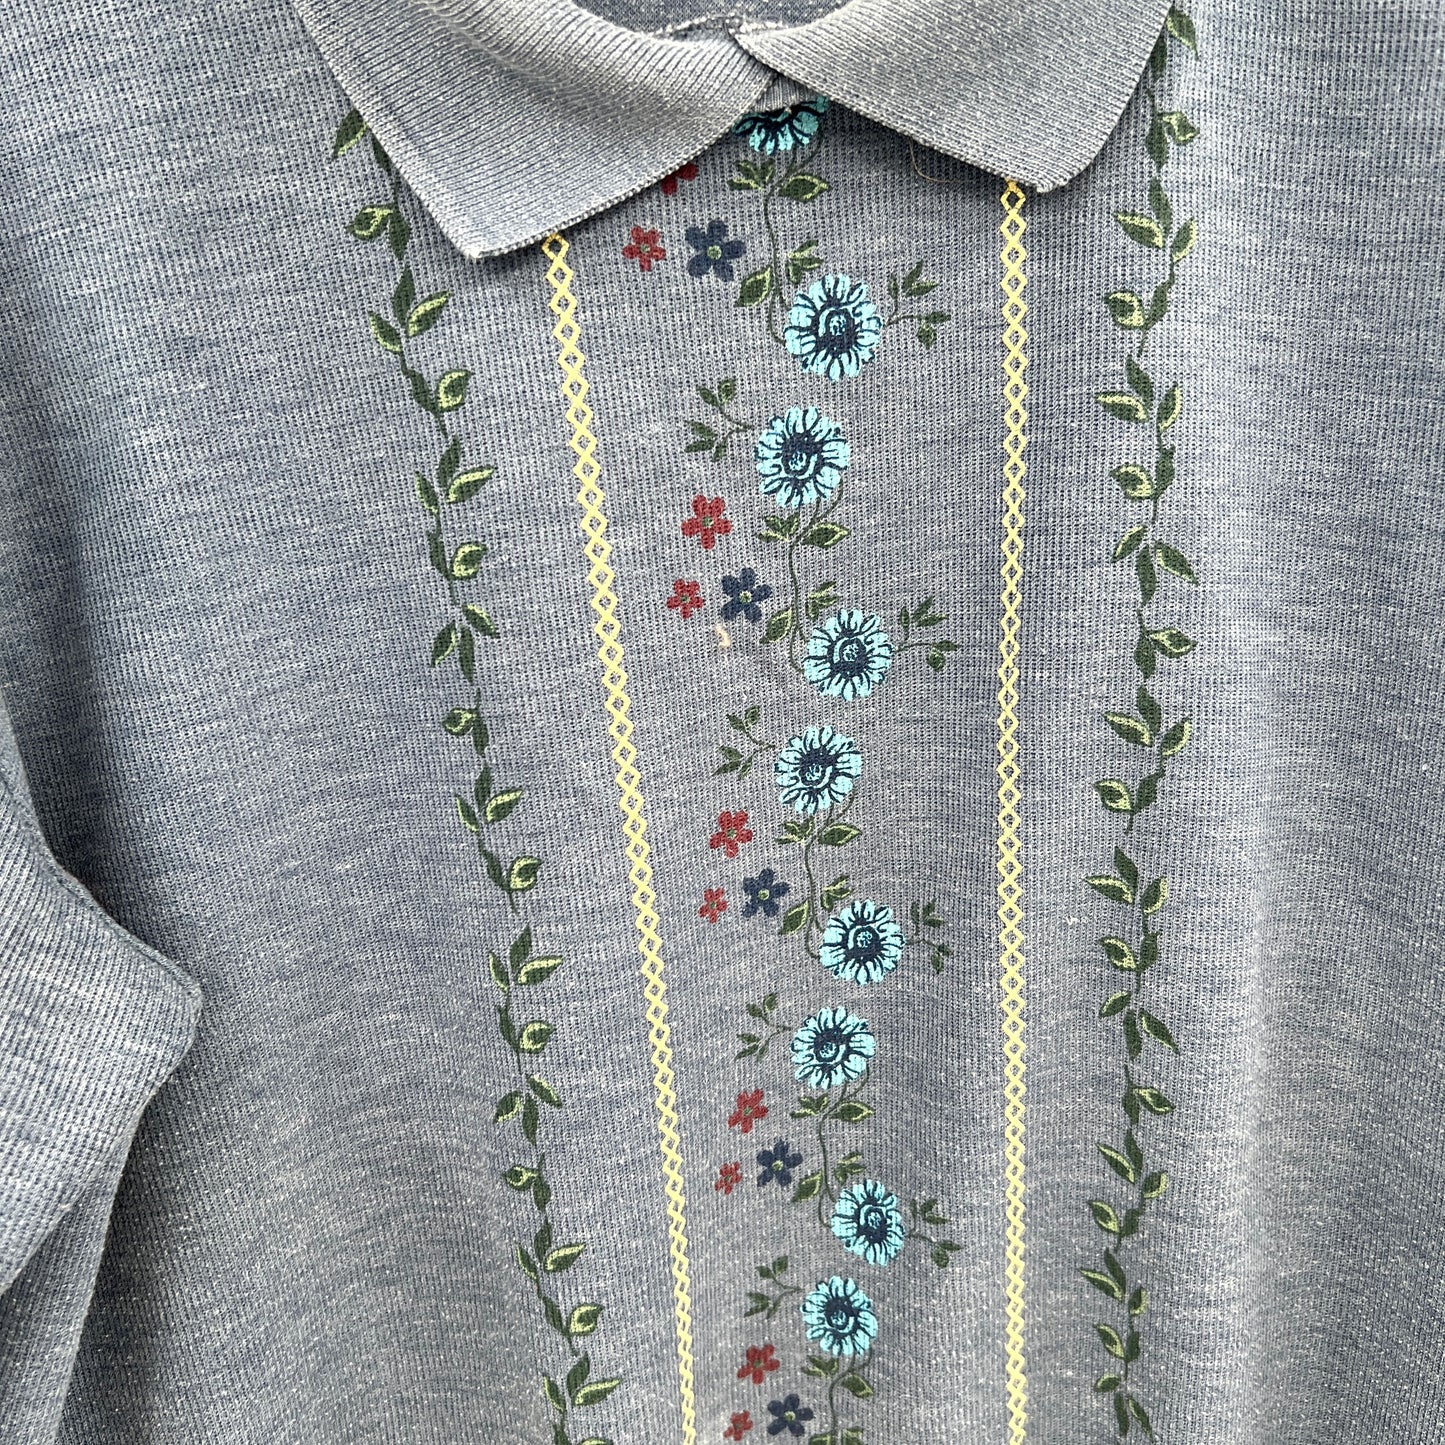 SOLD. Vintage Traditions Floral Embroidered Pullover